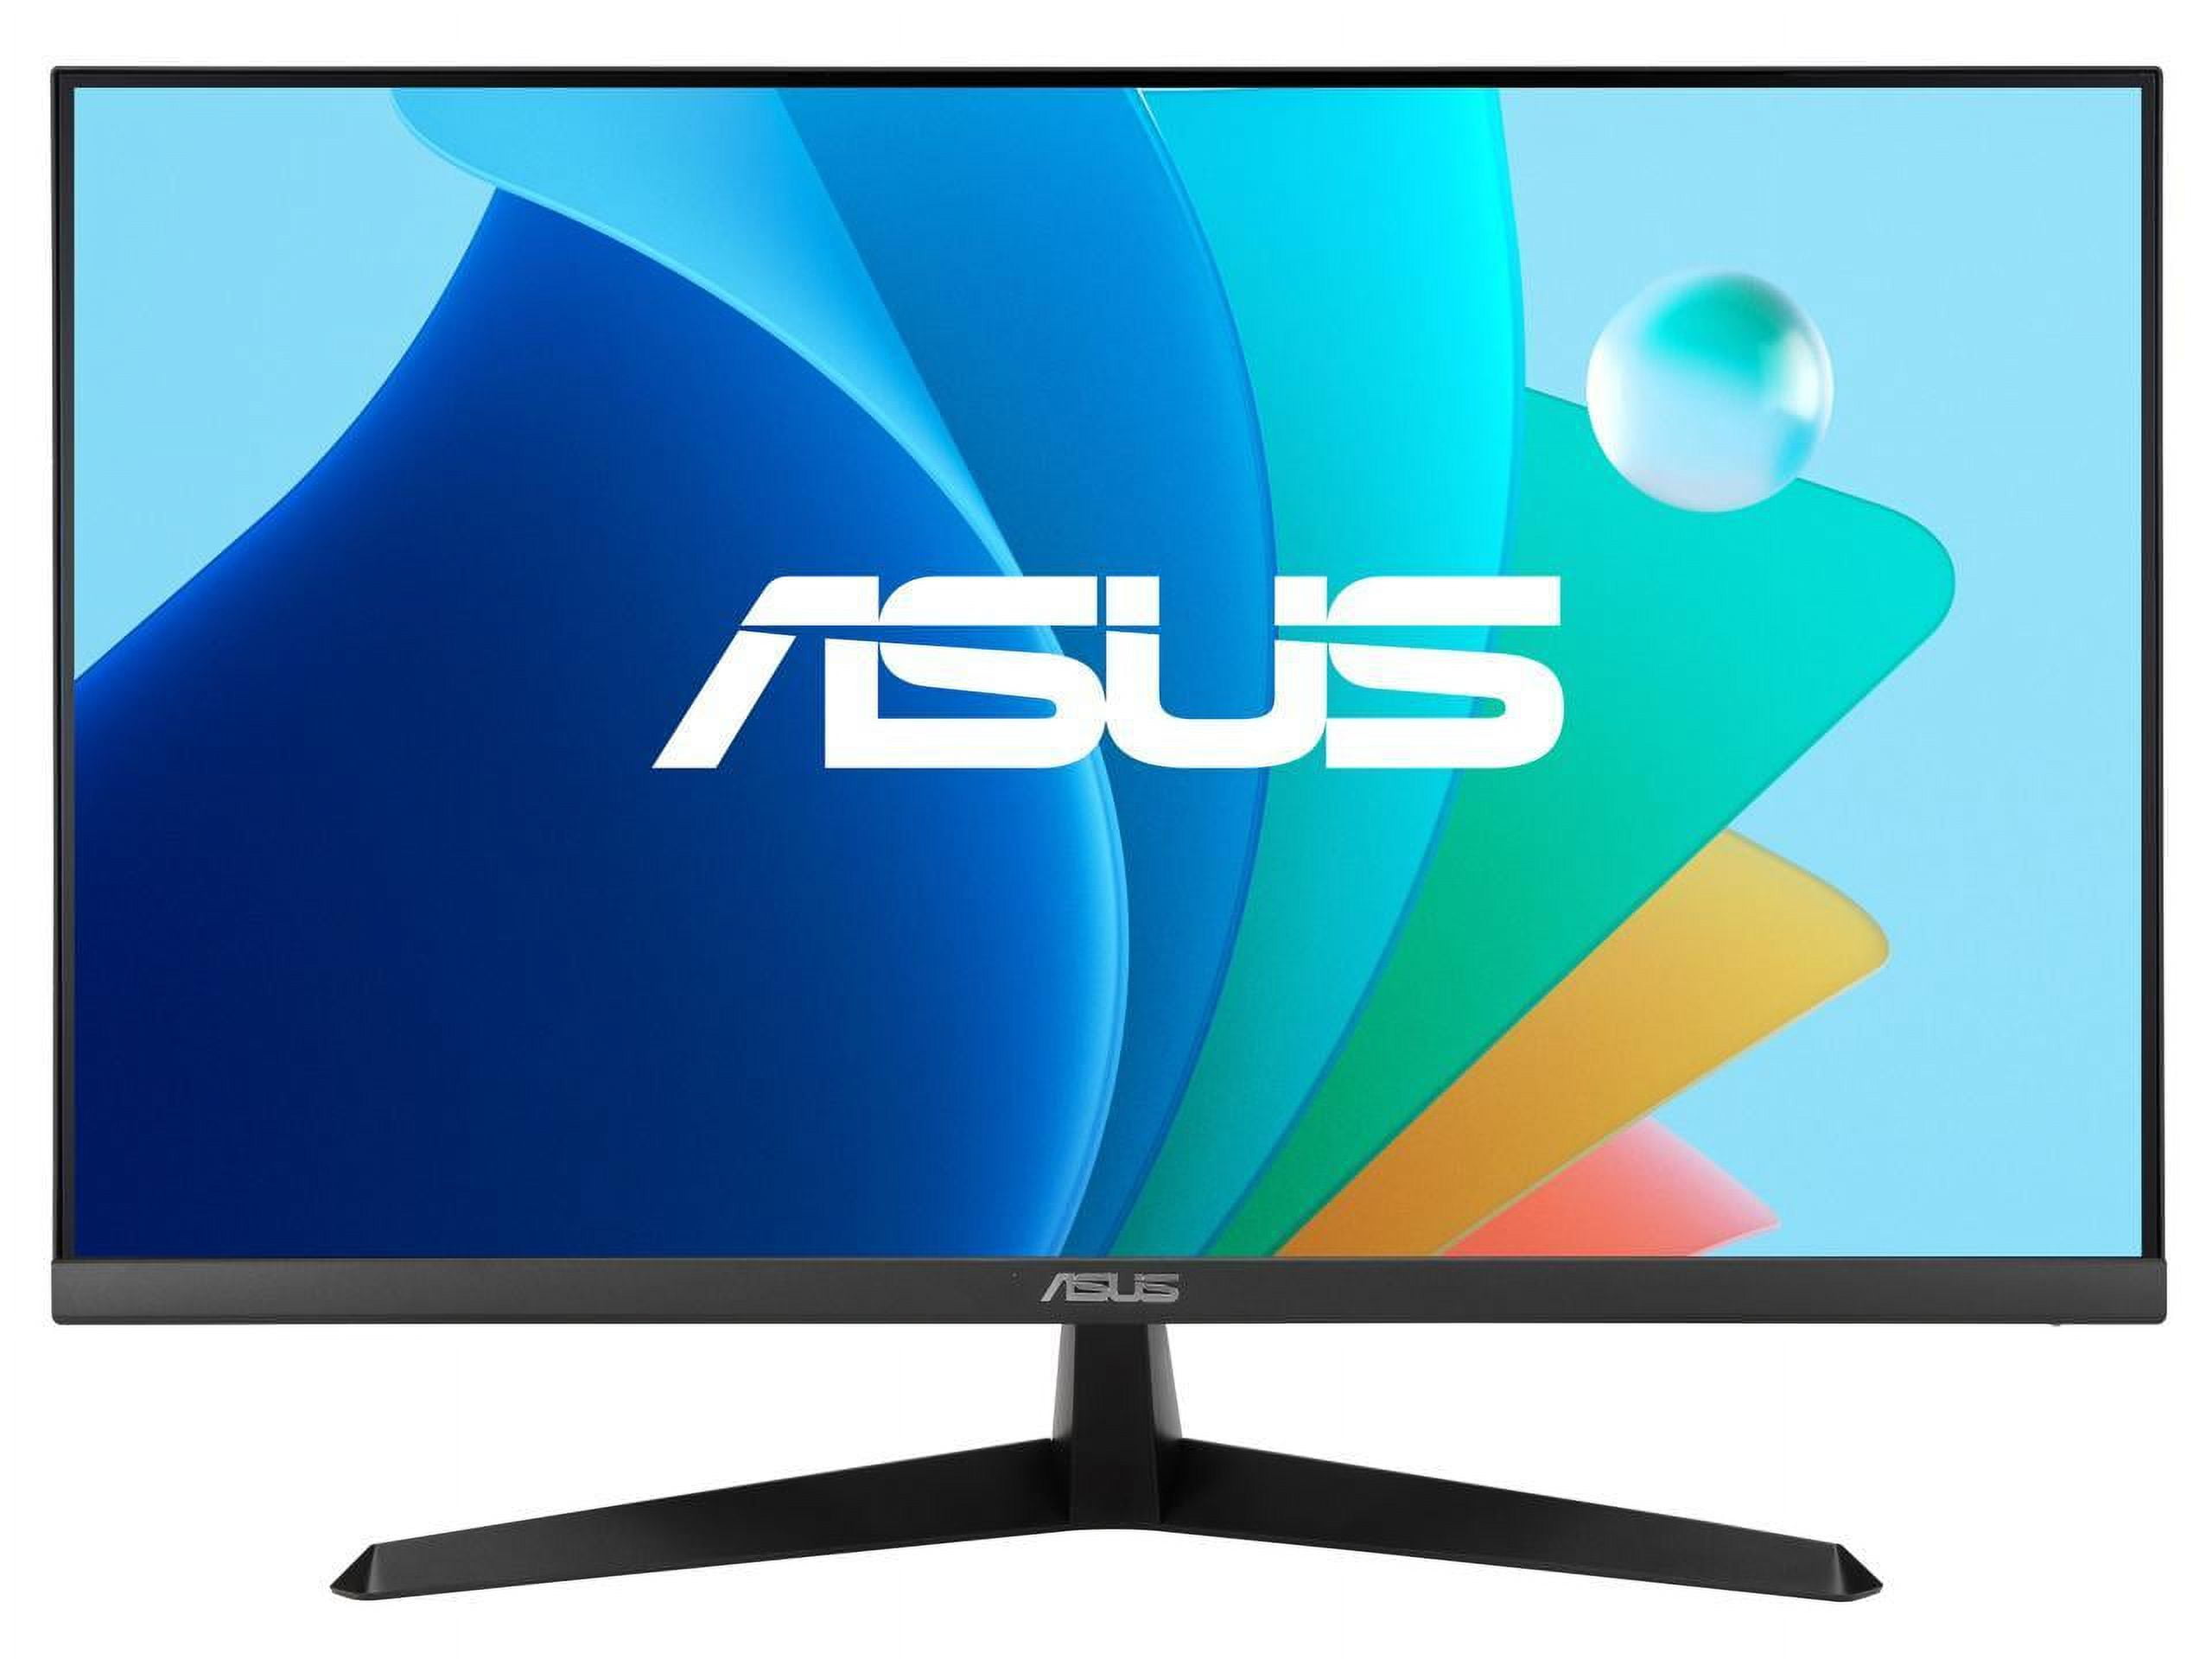 Picture of ASUS VY279HF 27 in. Class Full HD Gaming LED Monitor - 16-9 - 27 in. Viewable - In-plane Switching Technology - LED Backlight - 1920 x 1080 - 16.7 Million Colors